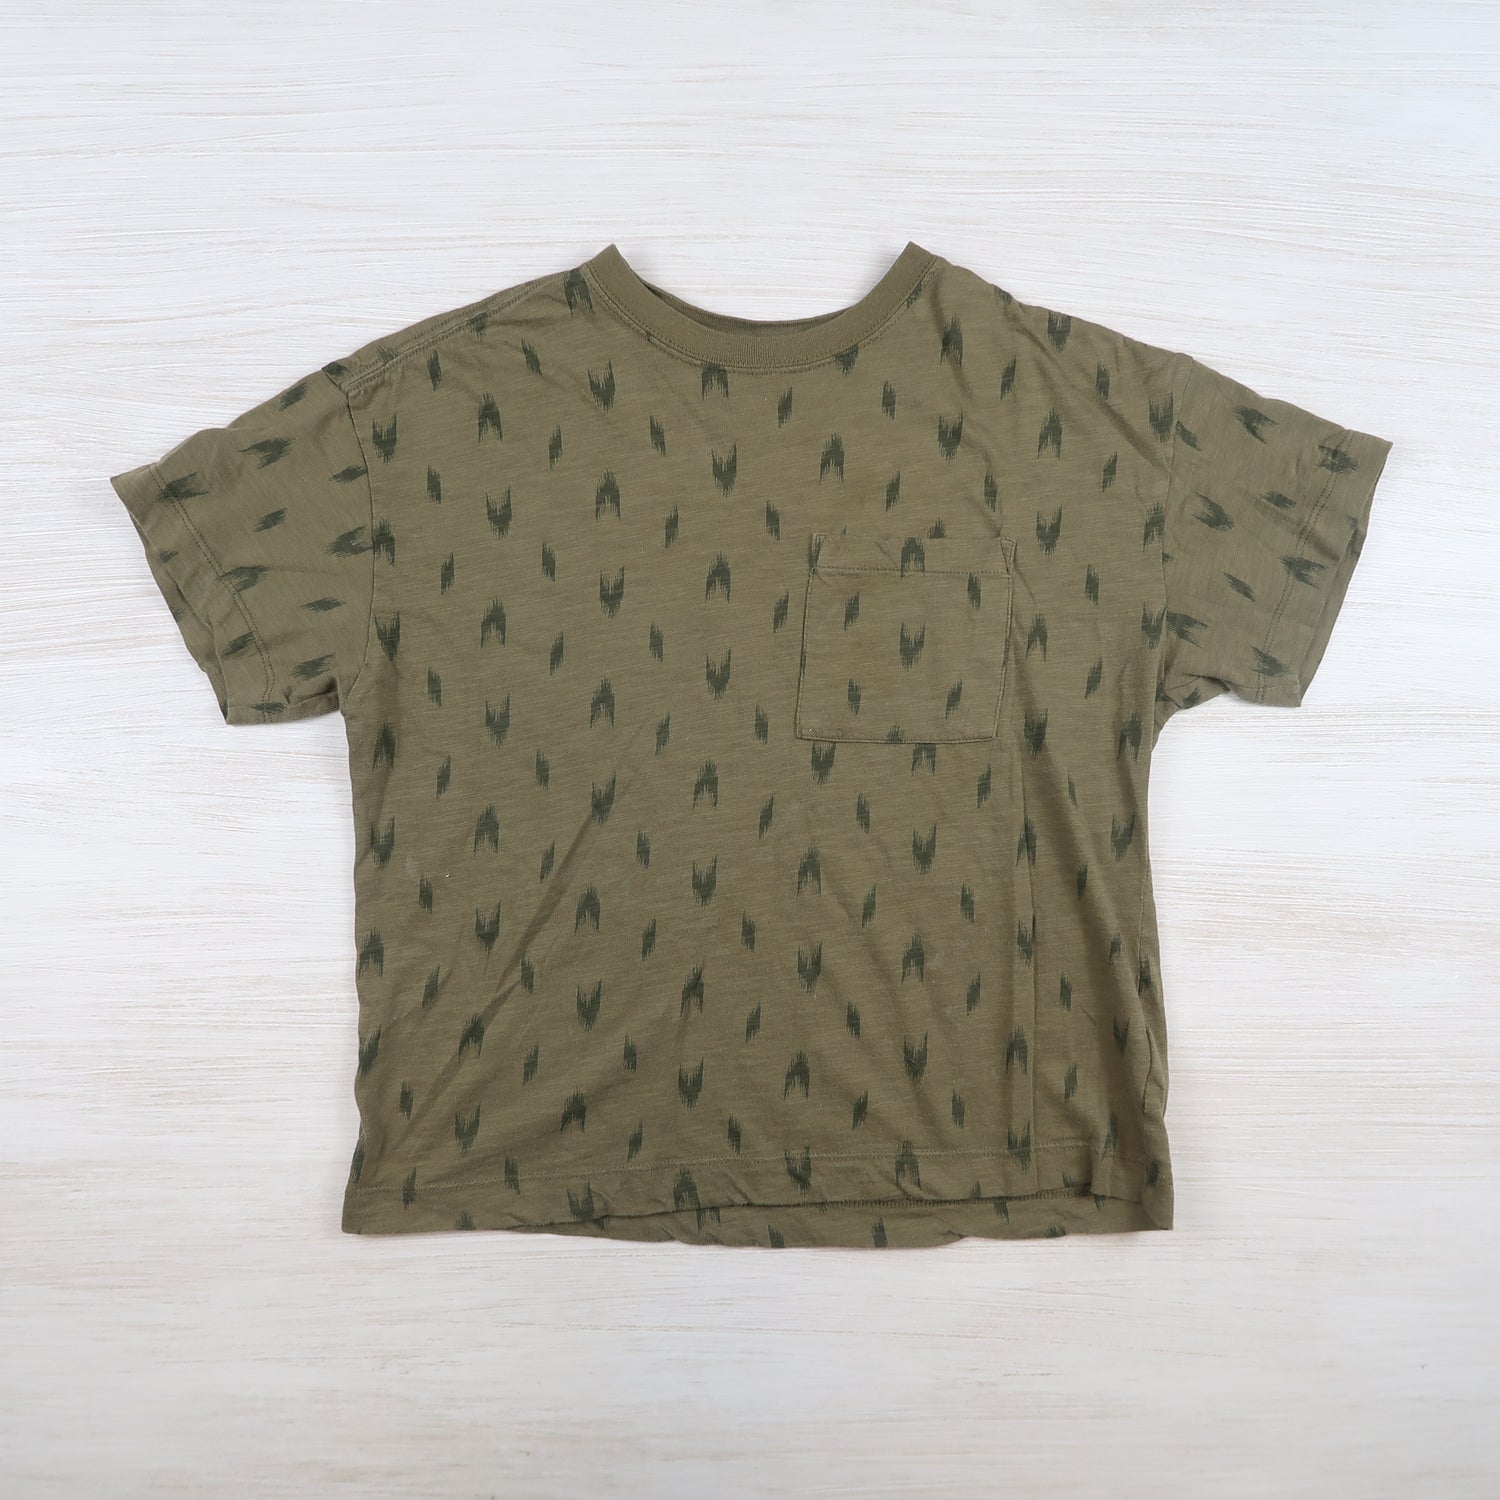 Old Navy - T-Shirt (8Y)